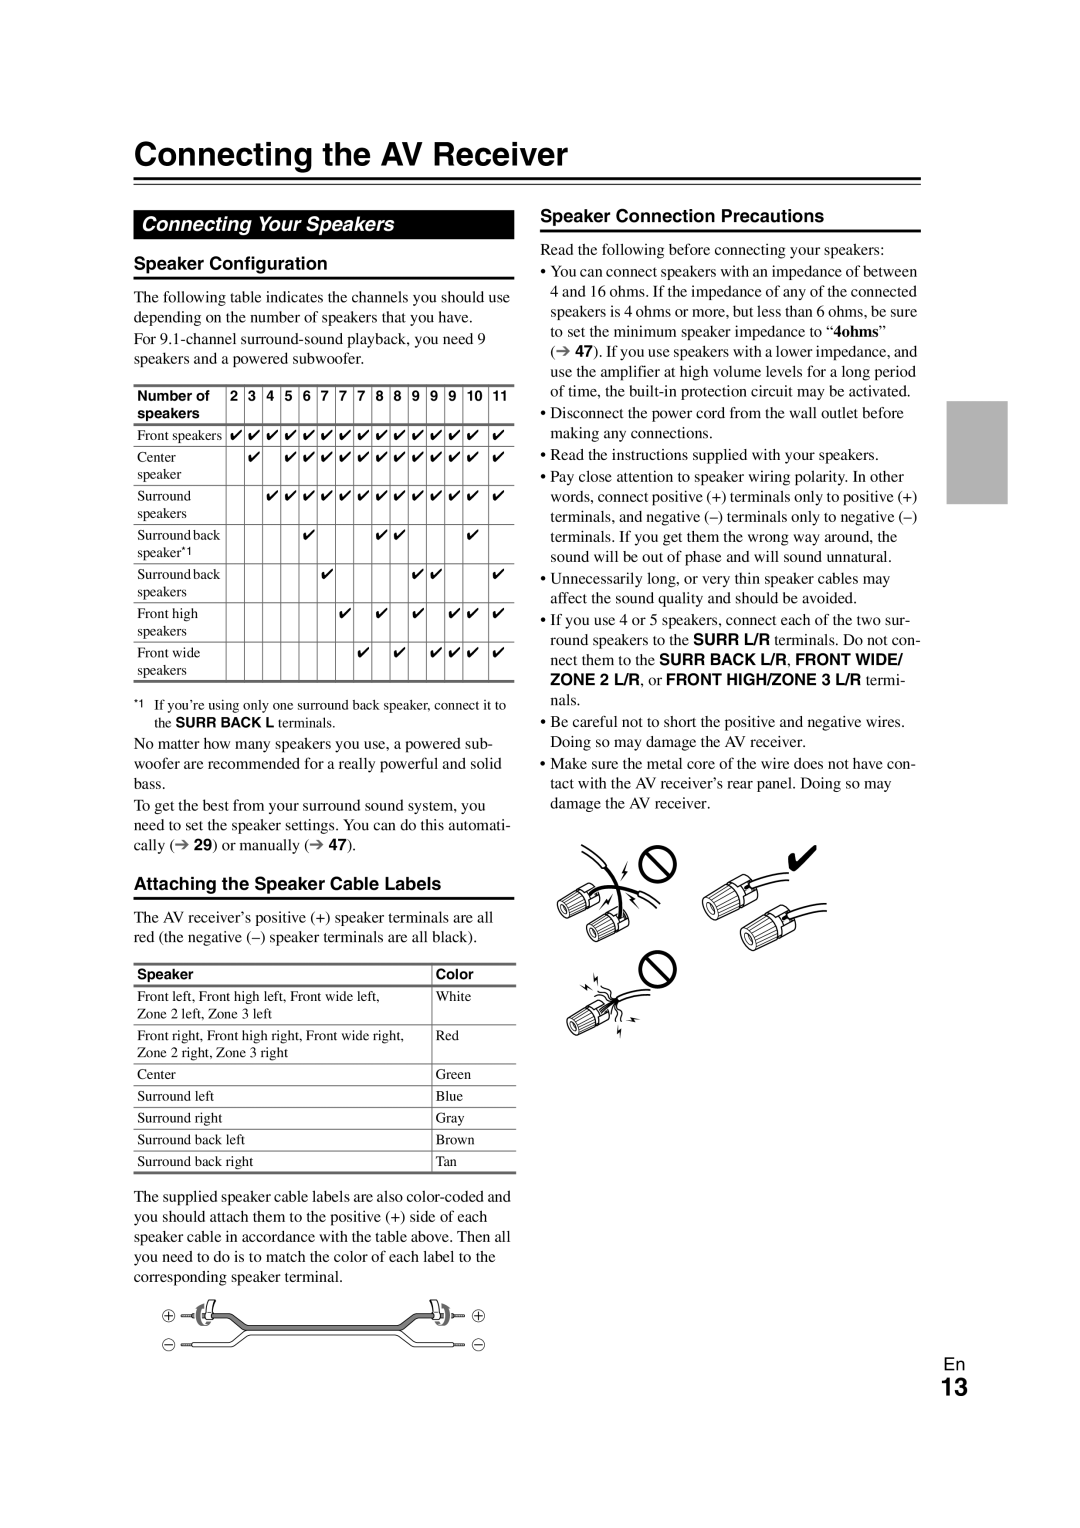 Onkyo TX-NR1008 instruction manual Connecting the AV Receiver, Connecting Your Speakers, Speaker Configuration 